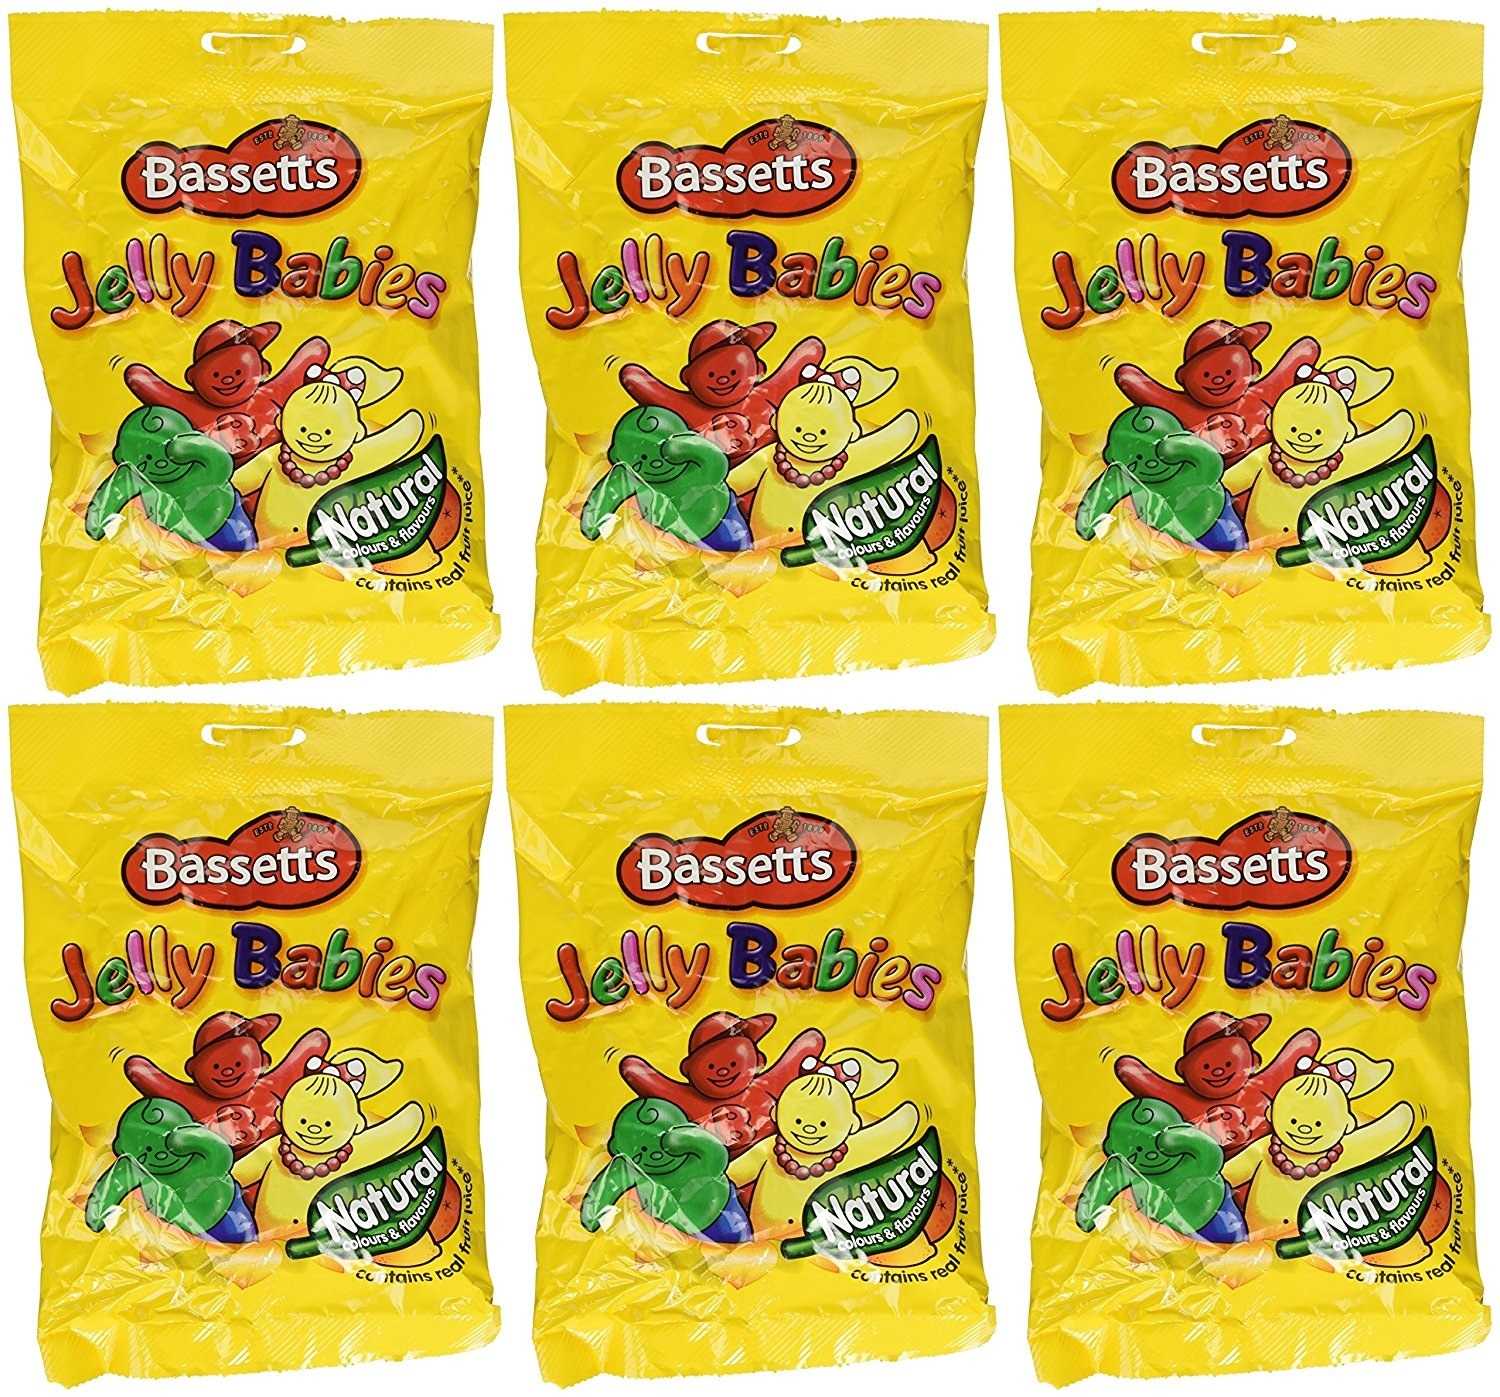 six bags of the jelly babies